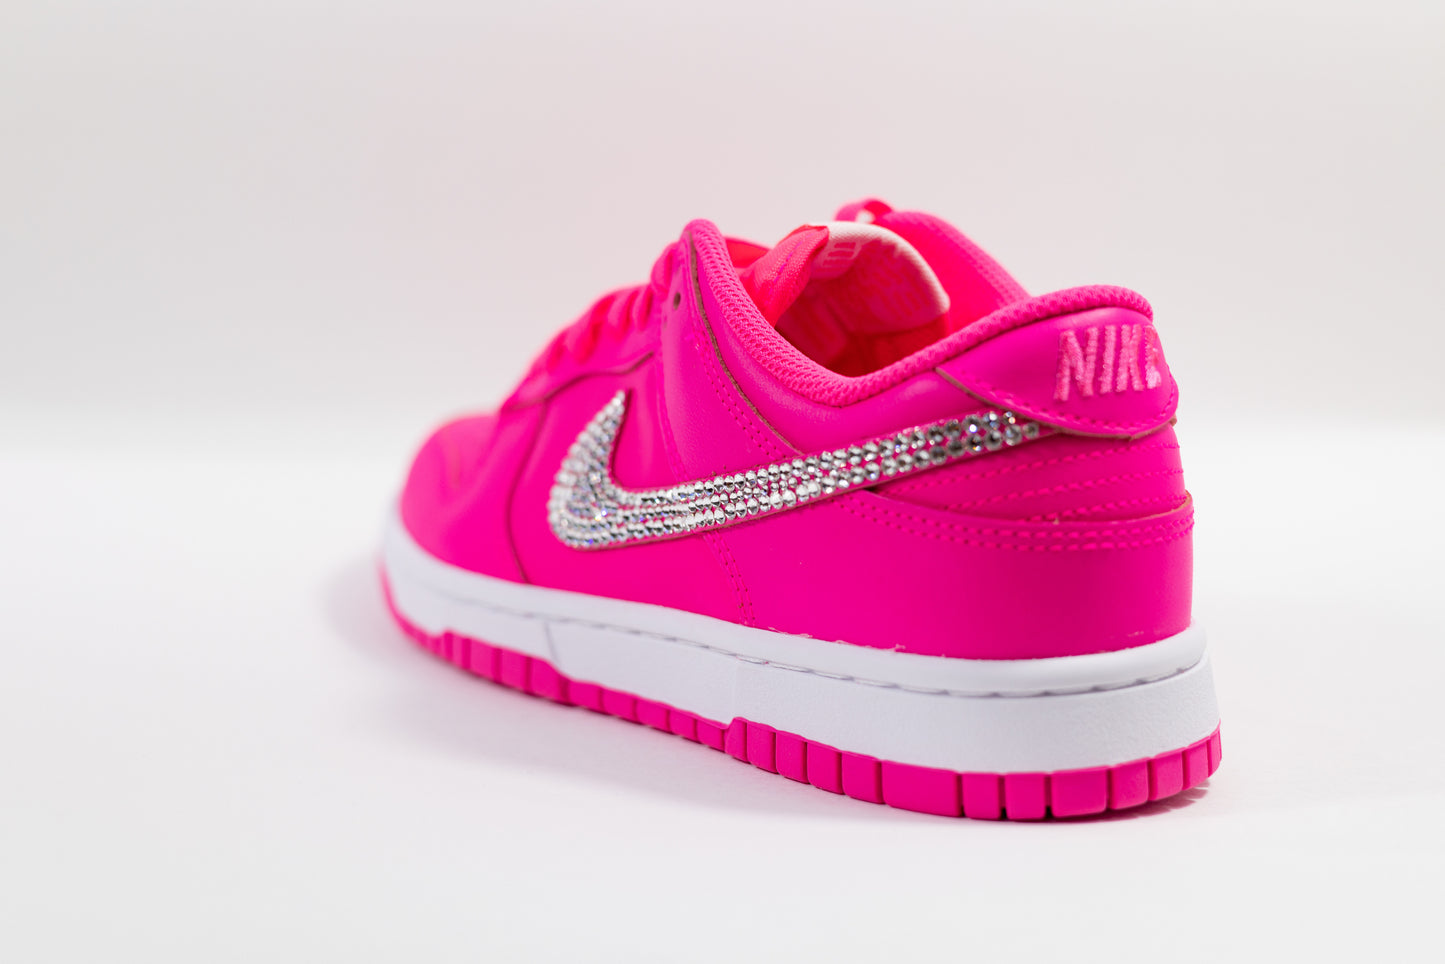 Nike Dunk Low "Hyper Pink" with Swarovski Crystals